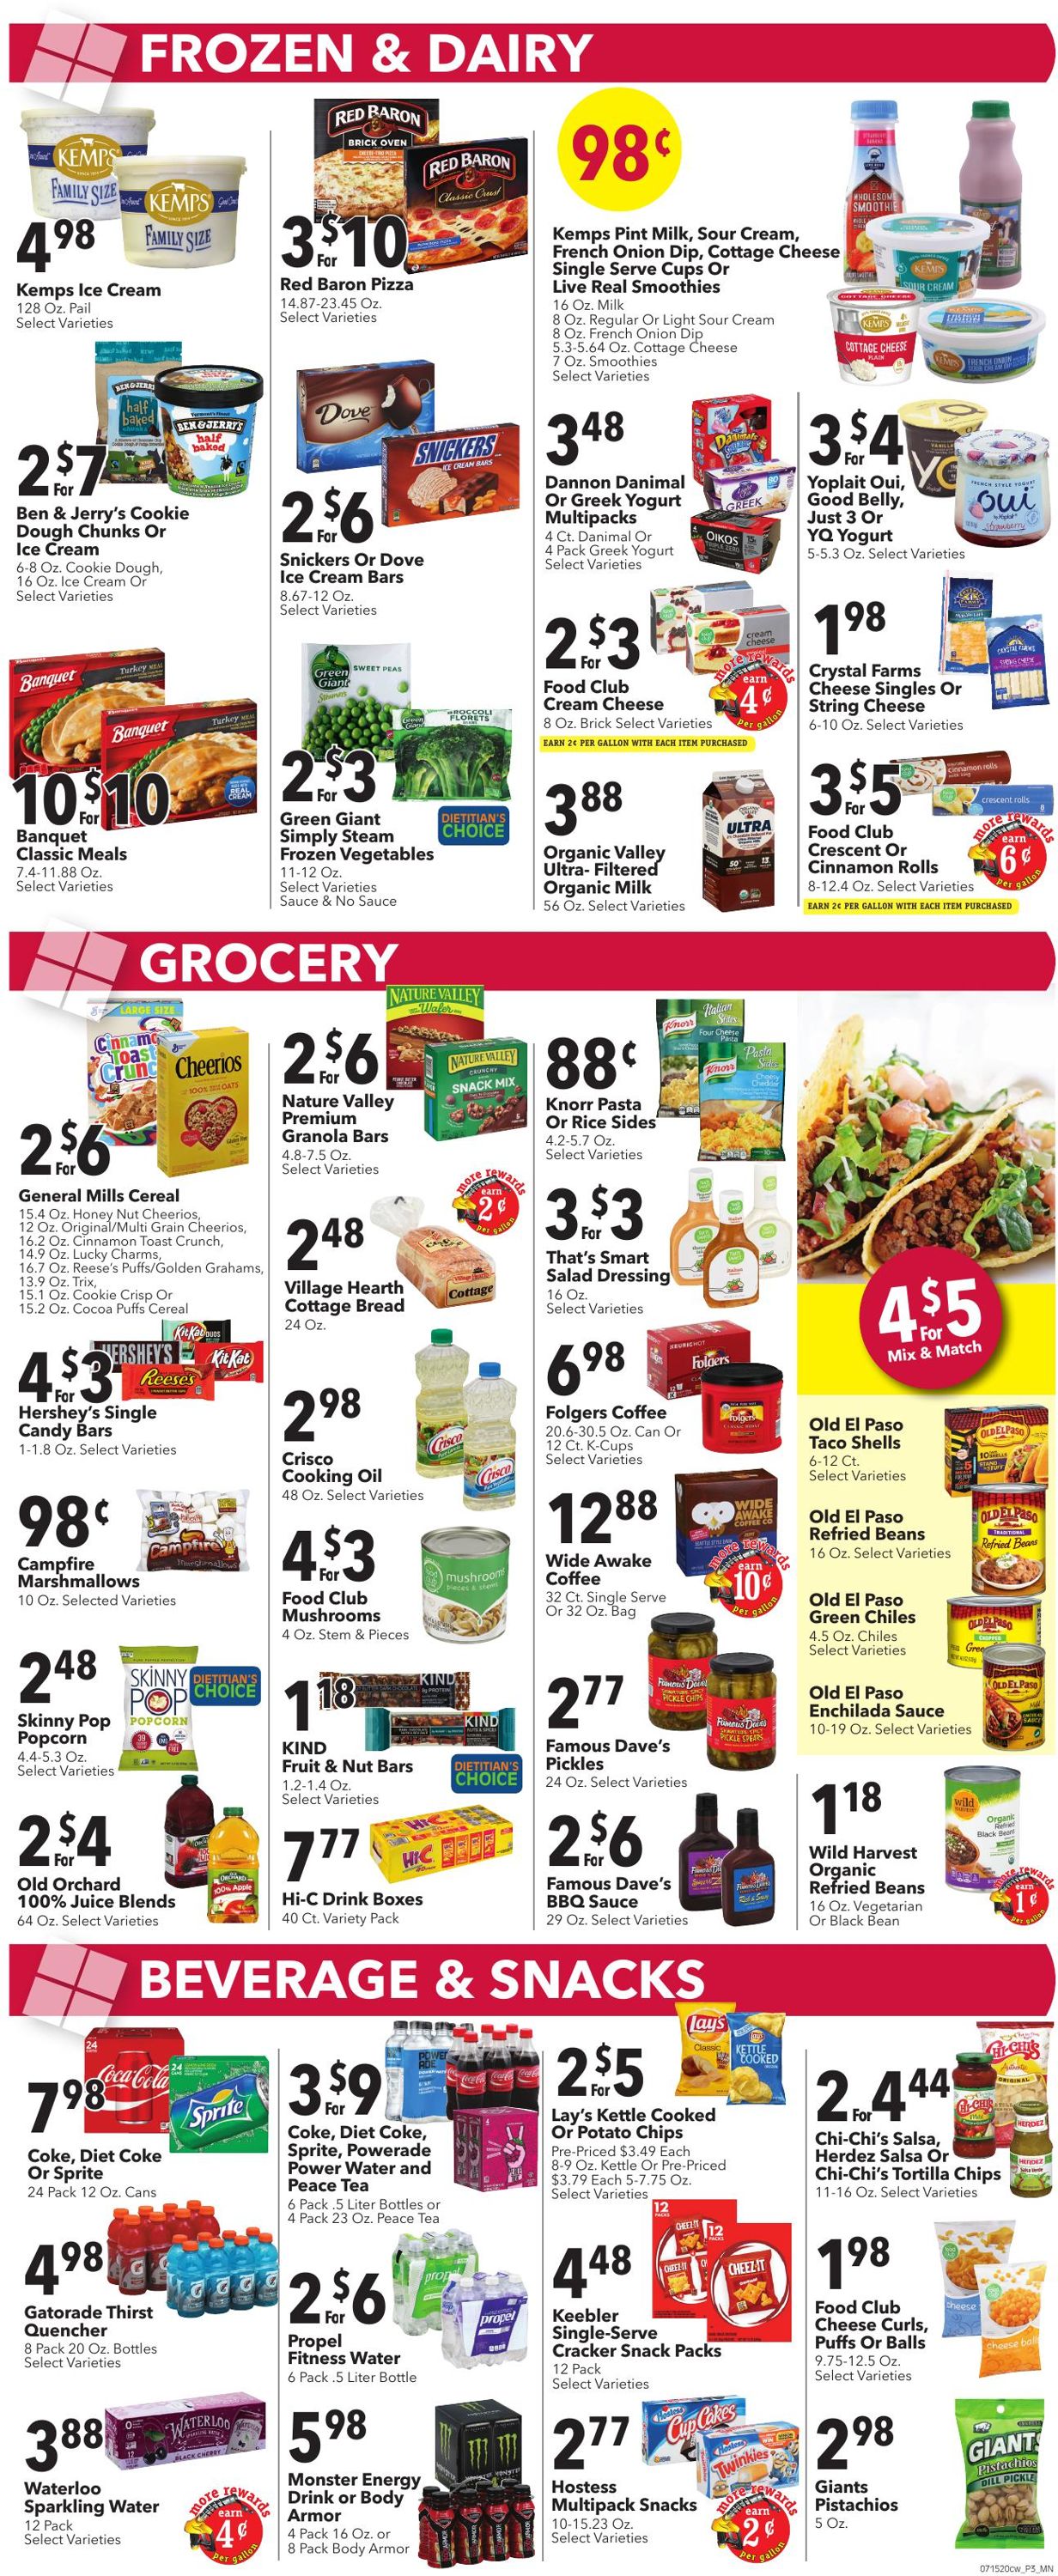 Cash Wise Weekly Ad Circular - valid 07/15-07/21/2020 (Page 3)